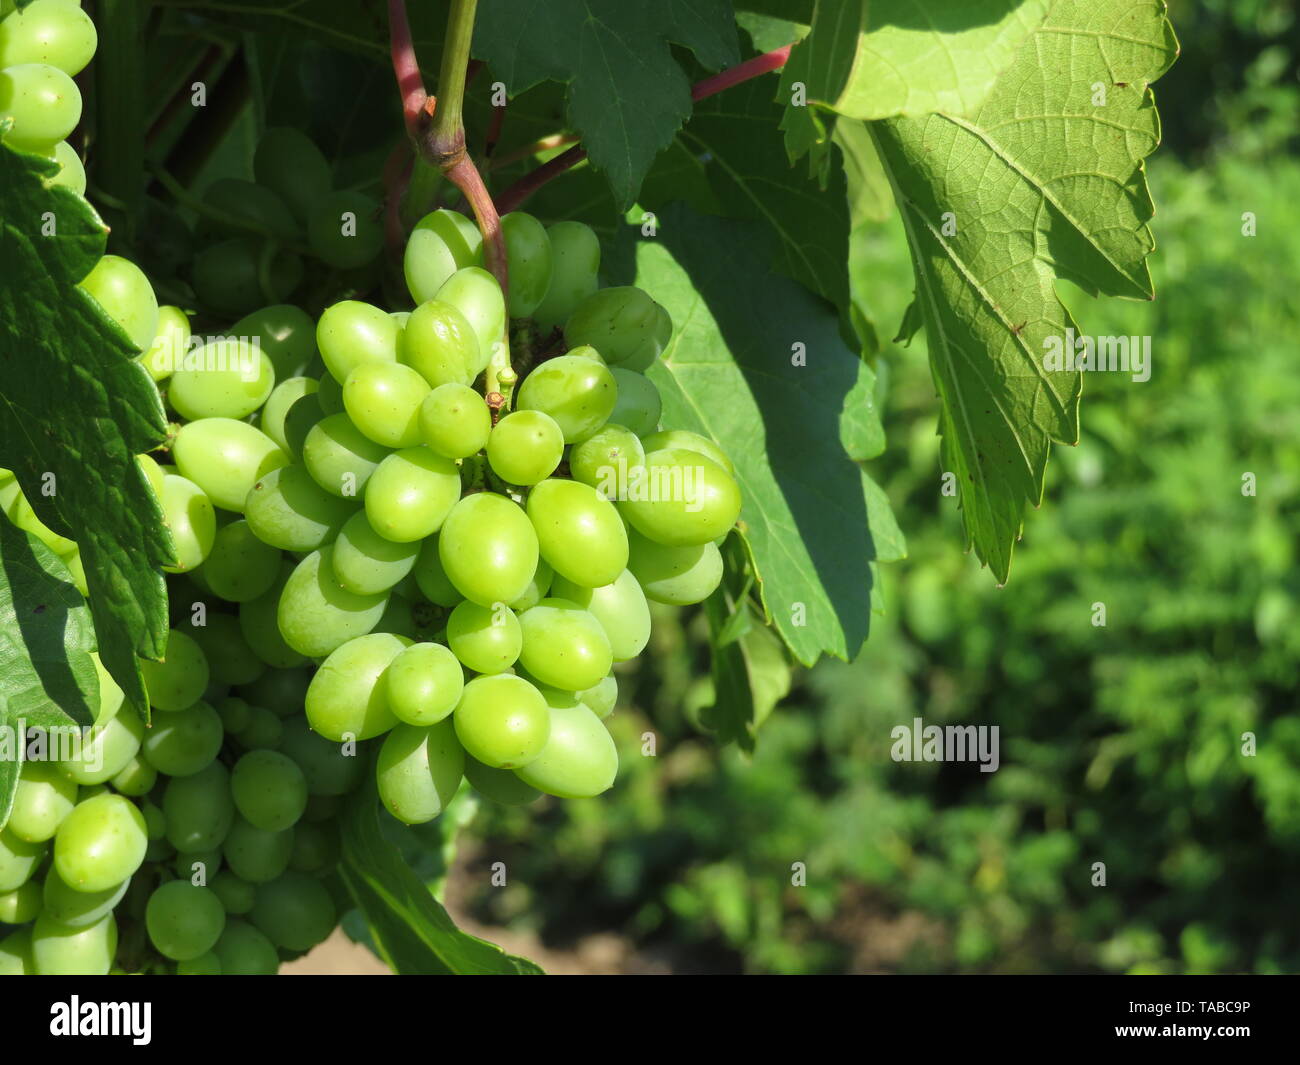 Green vineyard, bunches of white grapes growing in summer. Rural landscape with unripe grapevine and blue sky, winemaking concept Stock Photo